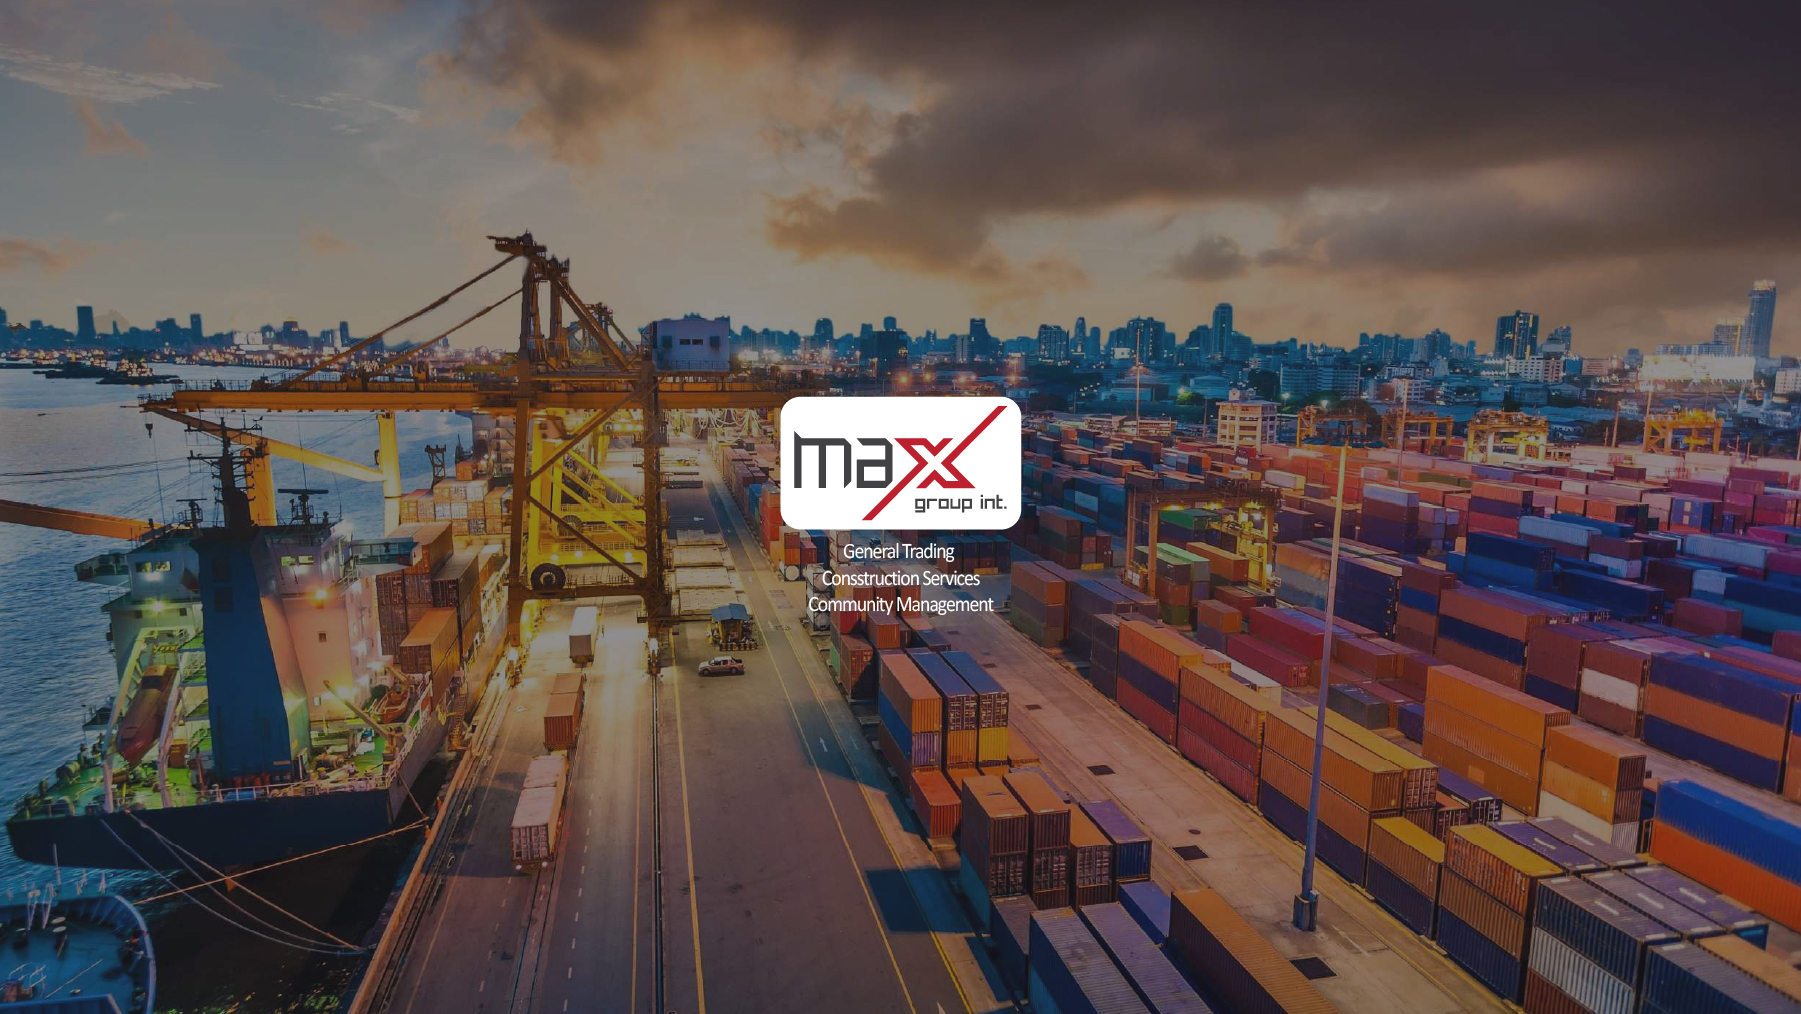 Max Group International - Engineering, Construction, Community Services & General Trading.